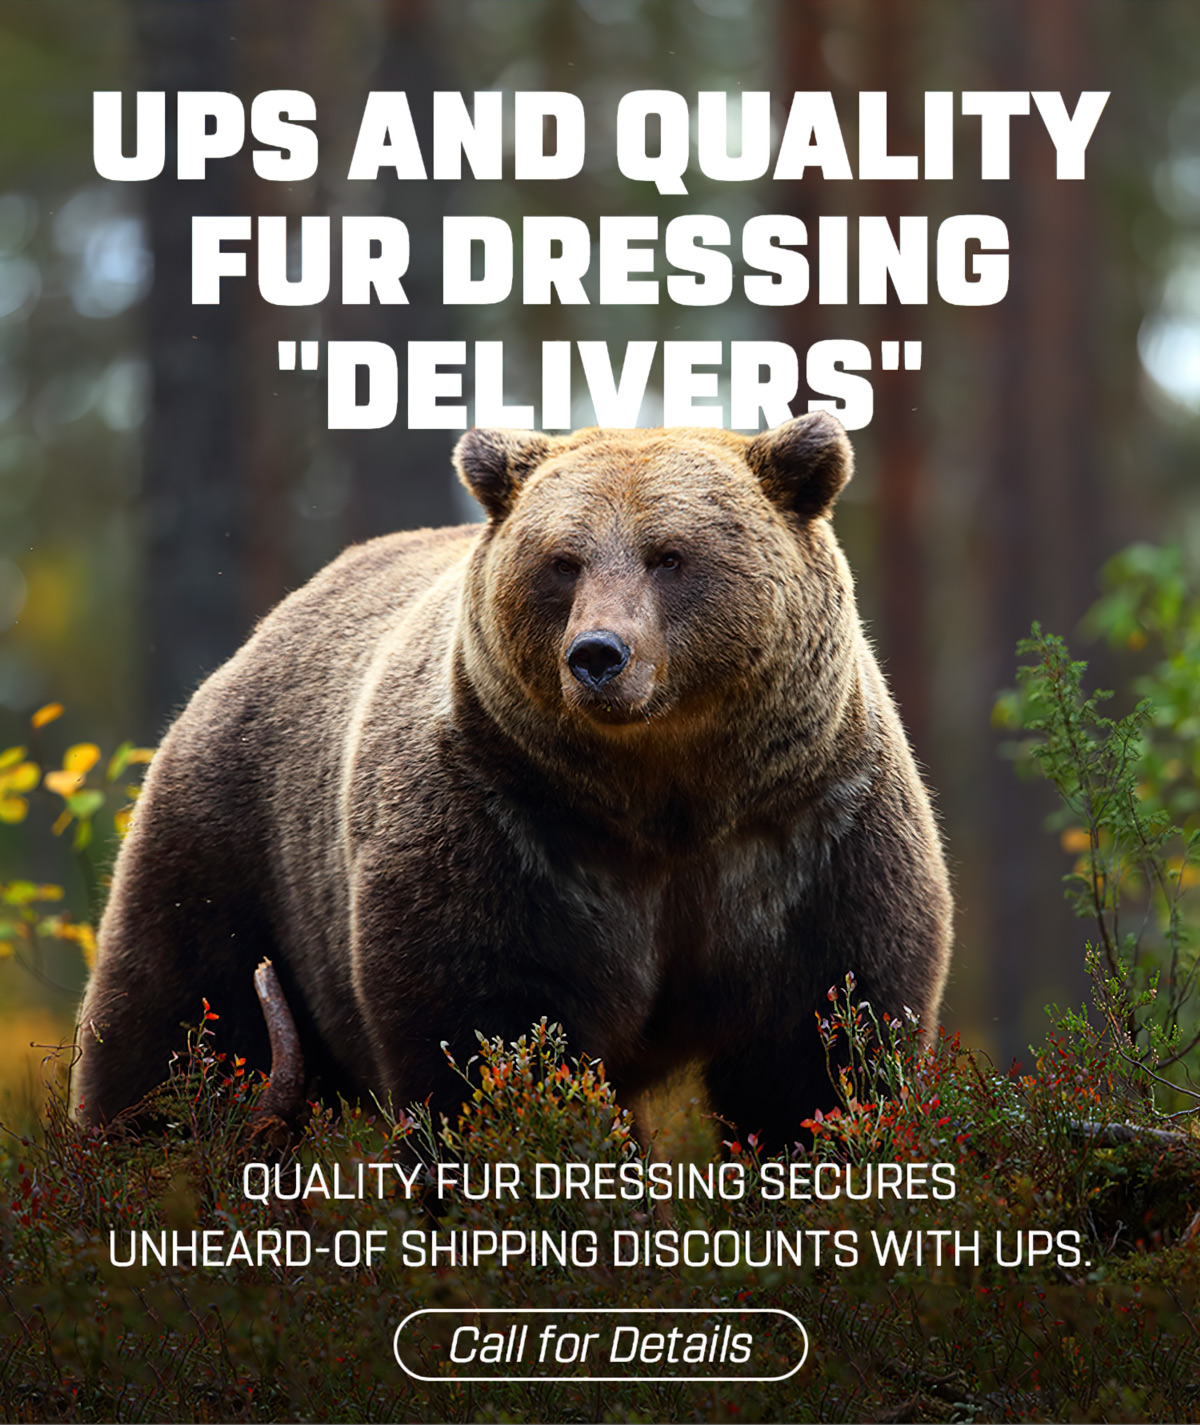 UPS and Quality Fur Dressing "Delivers" - GREAT Shipping Savings